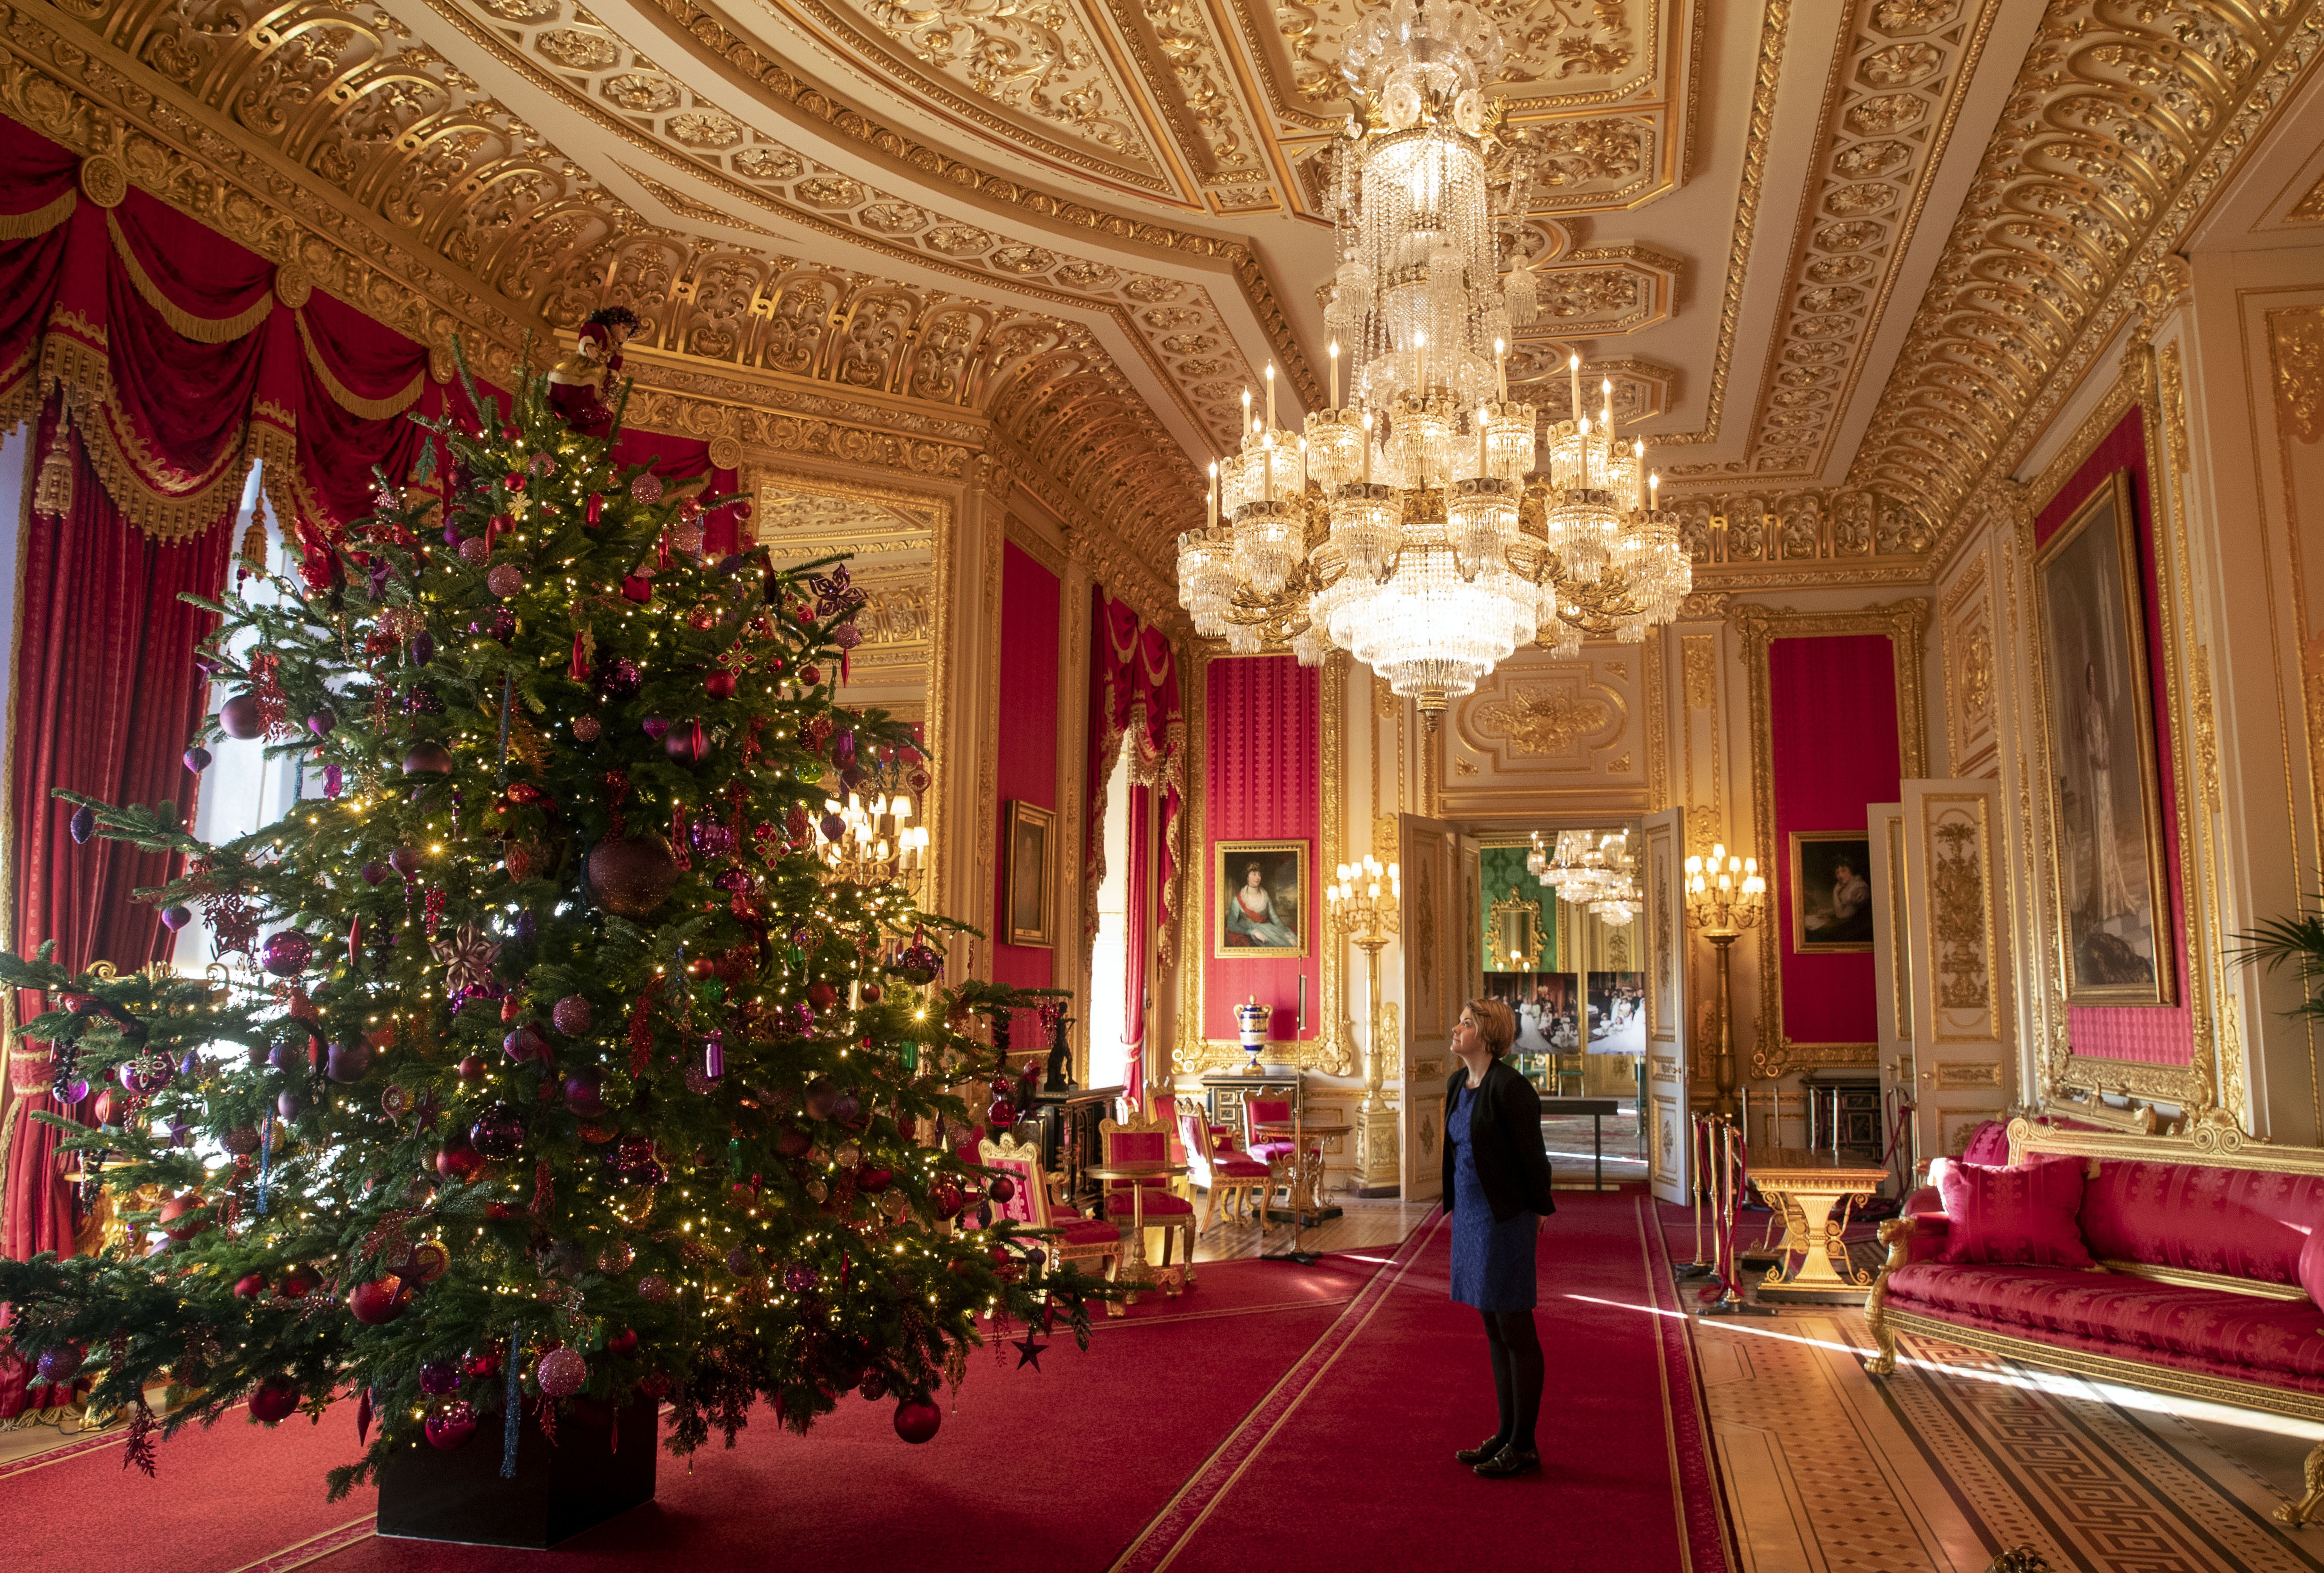 Final preparations are made to a 15ft Christmas tree in the Crimson Drawing Room at Windsor Castle, Berkshire, which is being decorated for Christmas. (Photo by Steve Parsons/PA Images via Getty Images) (Foto: PA Images via Getty Images)